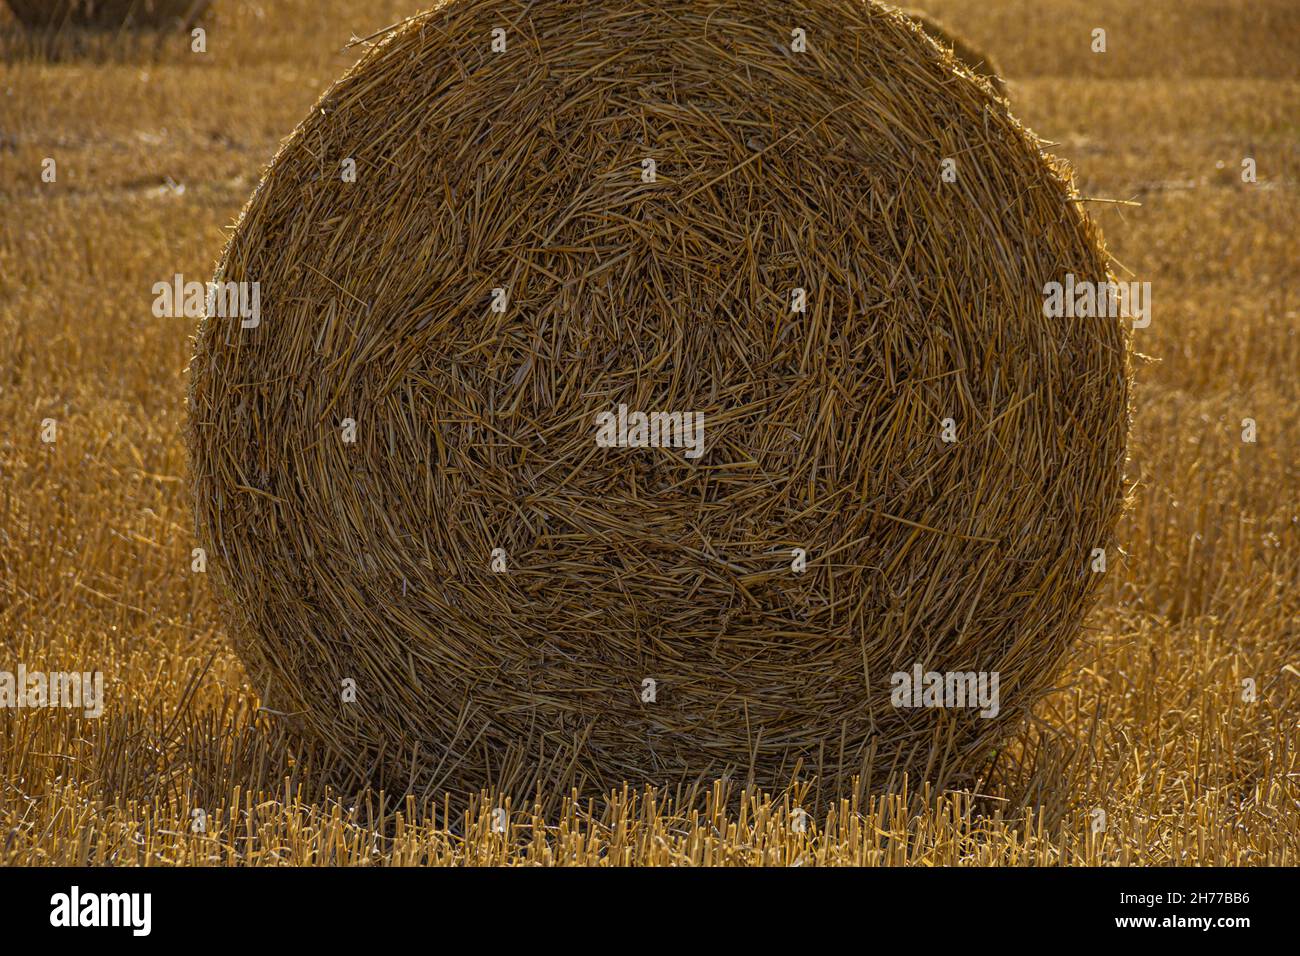 close-up of a hay bale in a field, St Helena Bay, Velddrif, Paternoster, Cape West Coast, South Africa Stock Photo